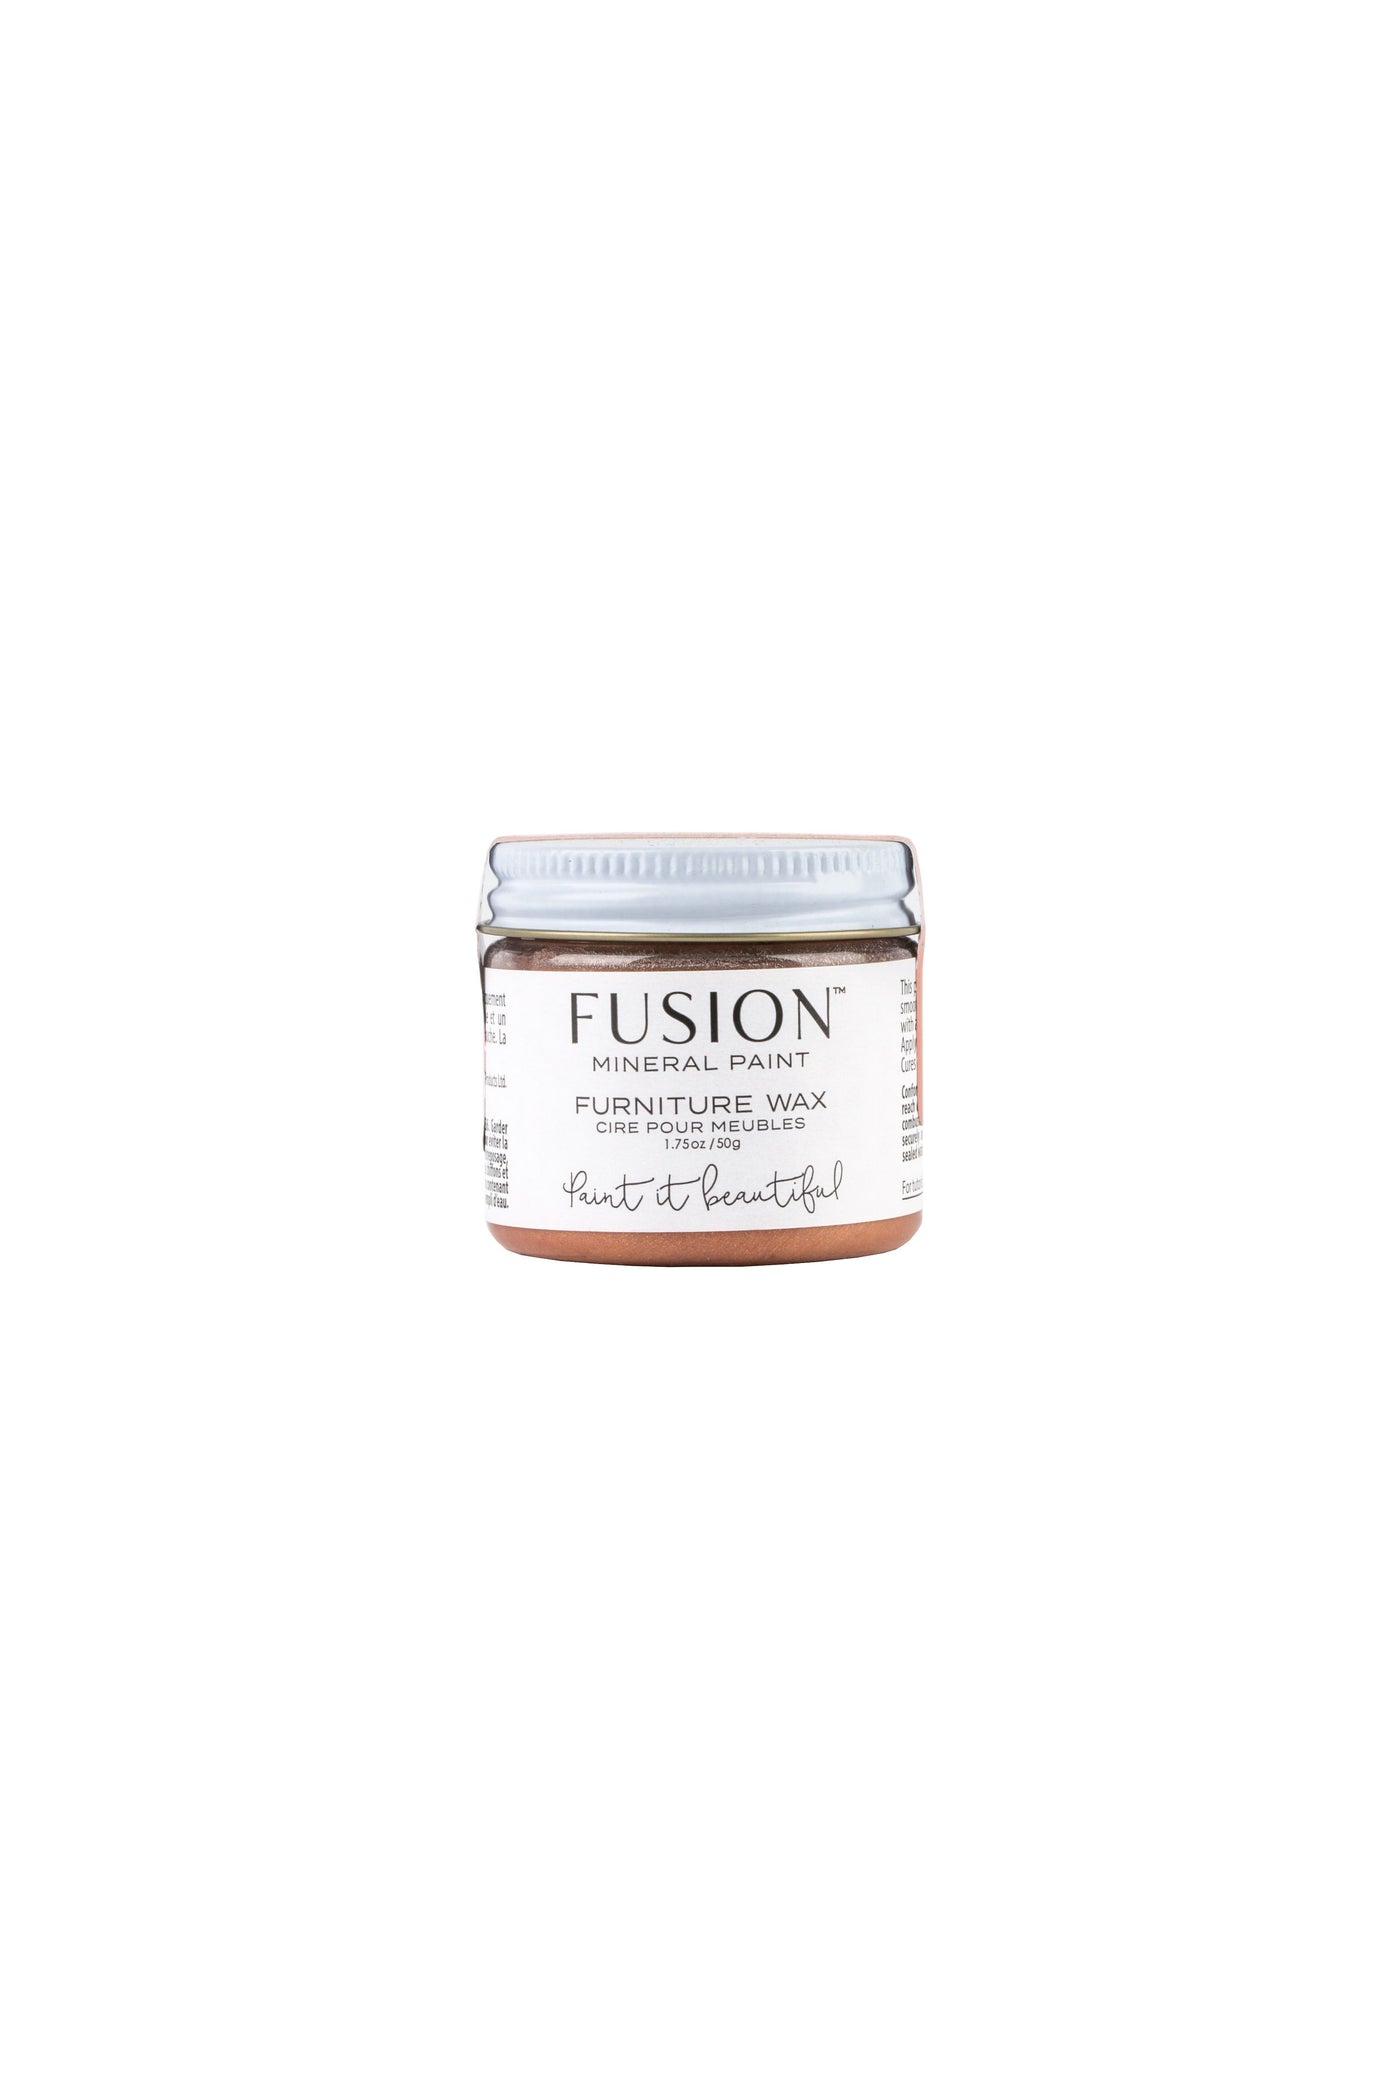 Copper Fusion Furniture Wax 50g For the Love Creations